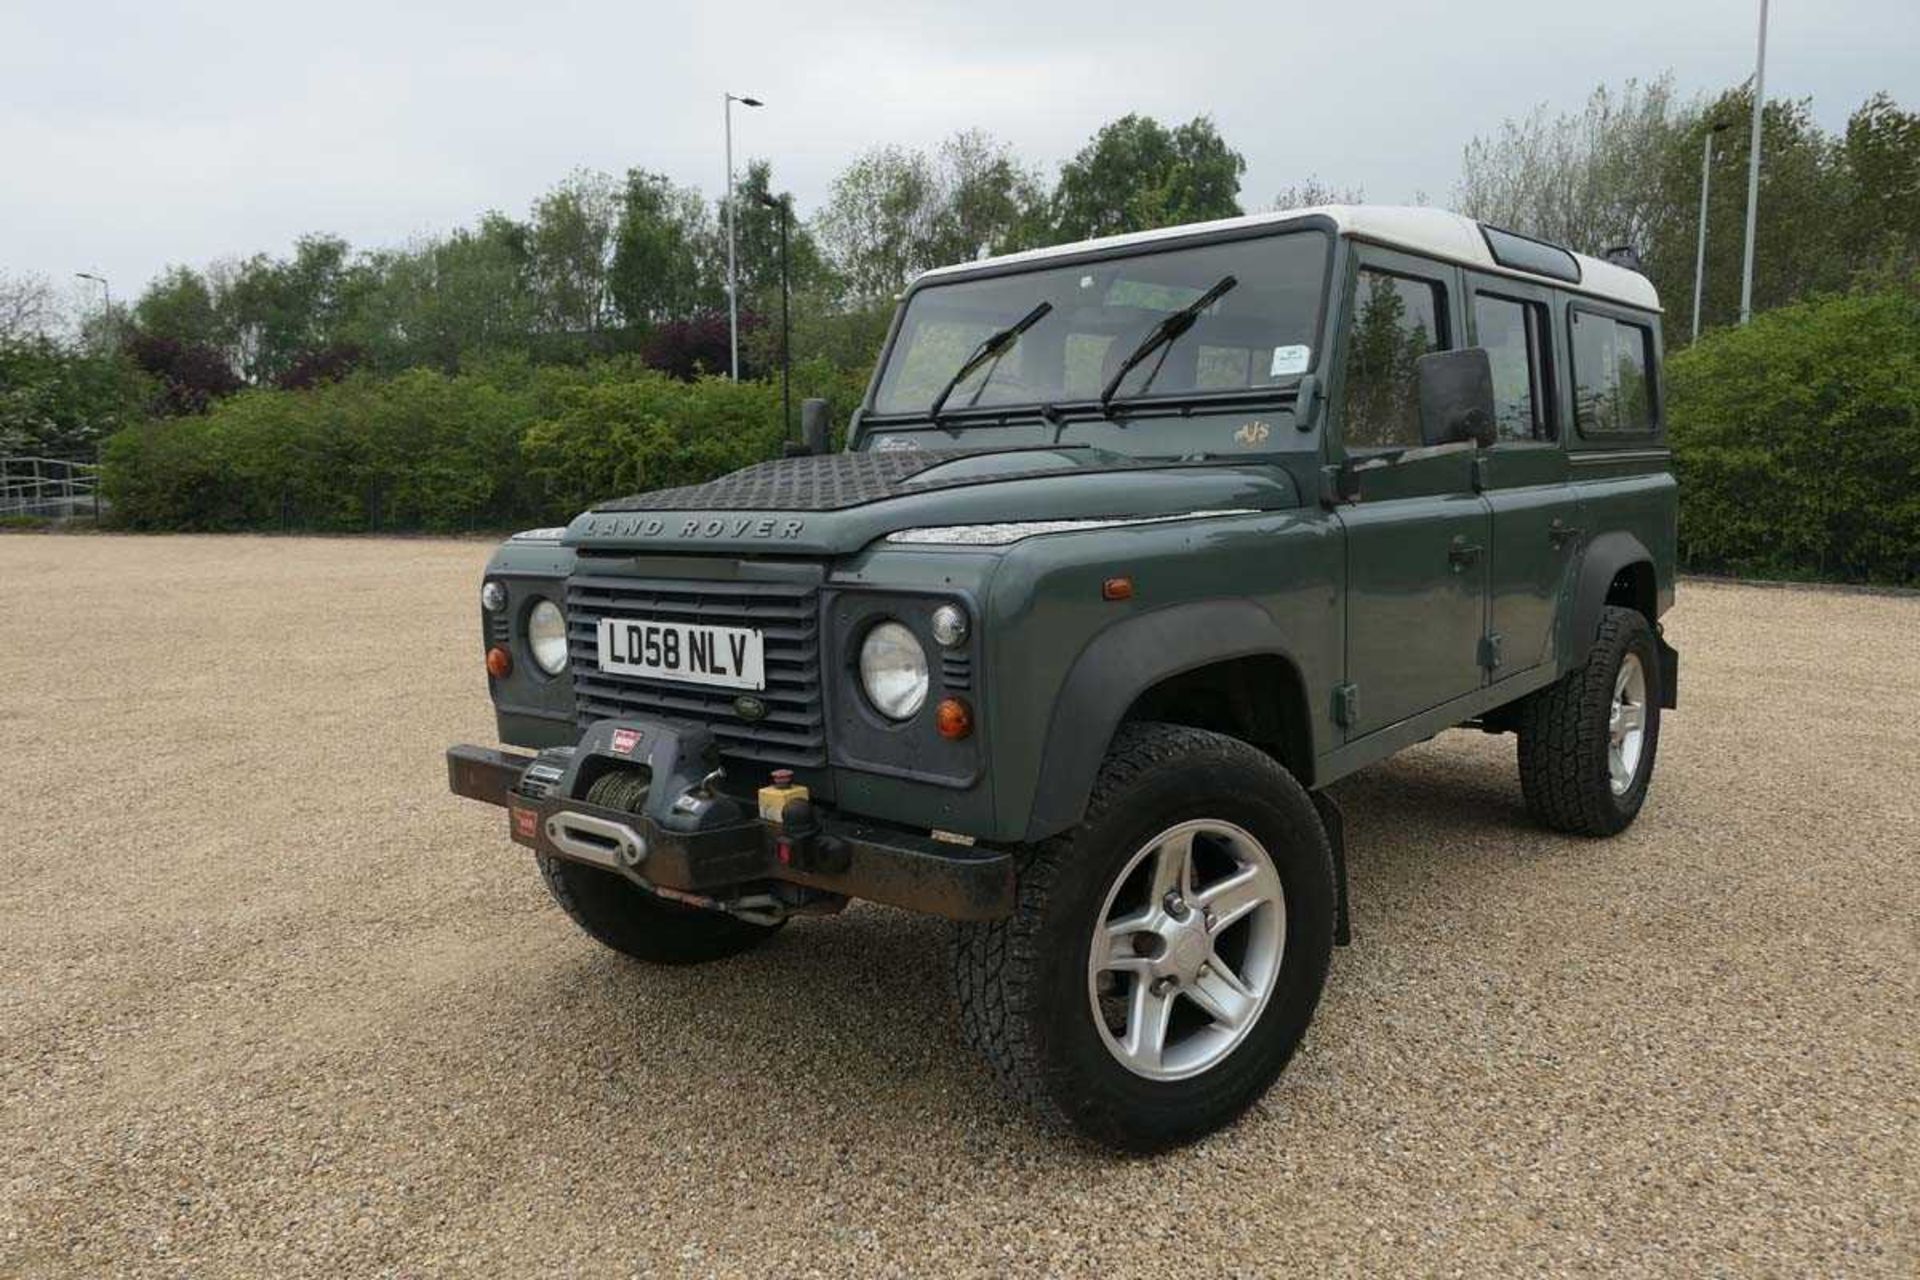 (LD58 NLV) 2008 Land Rover Defender 110 LWB station wagon estate in green, 2402cc diesel, 6-speed - Image 17 of 20